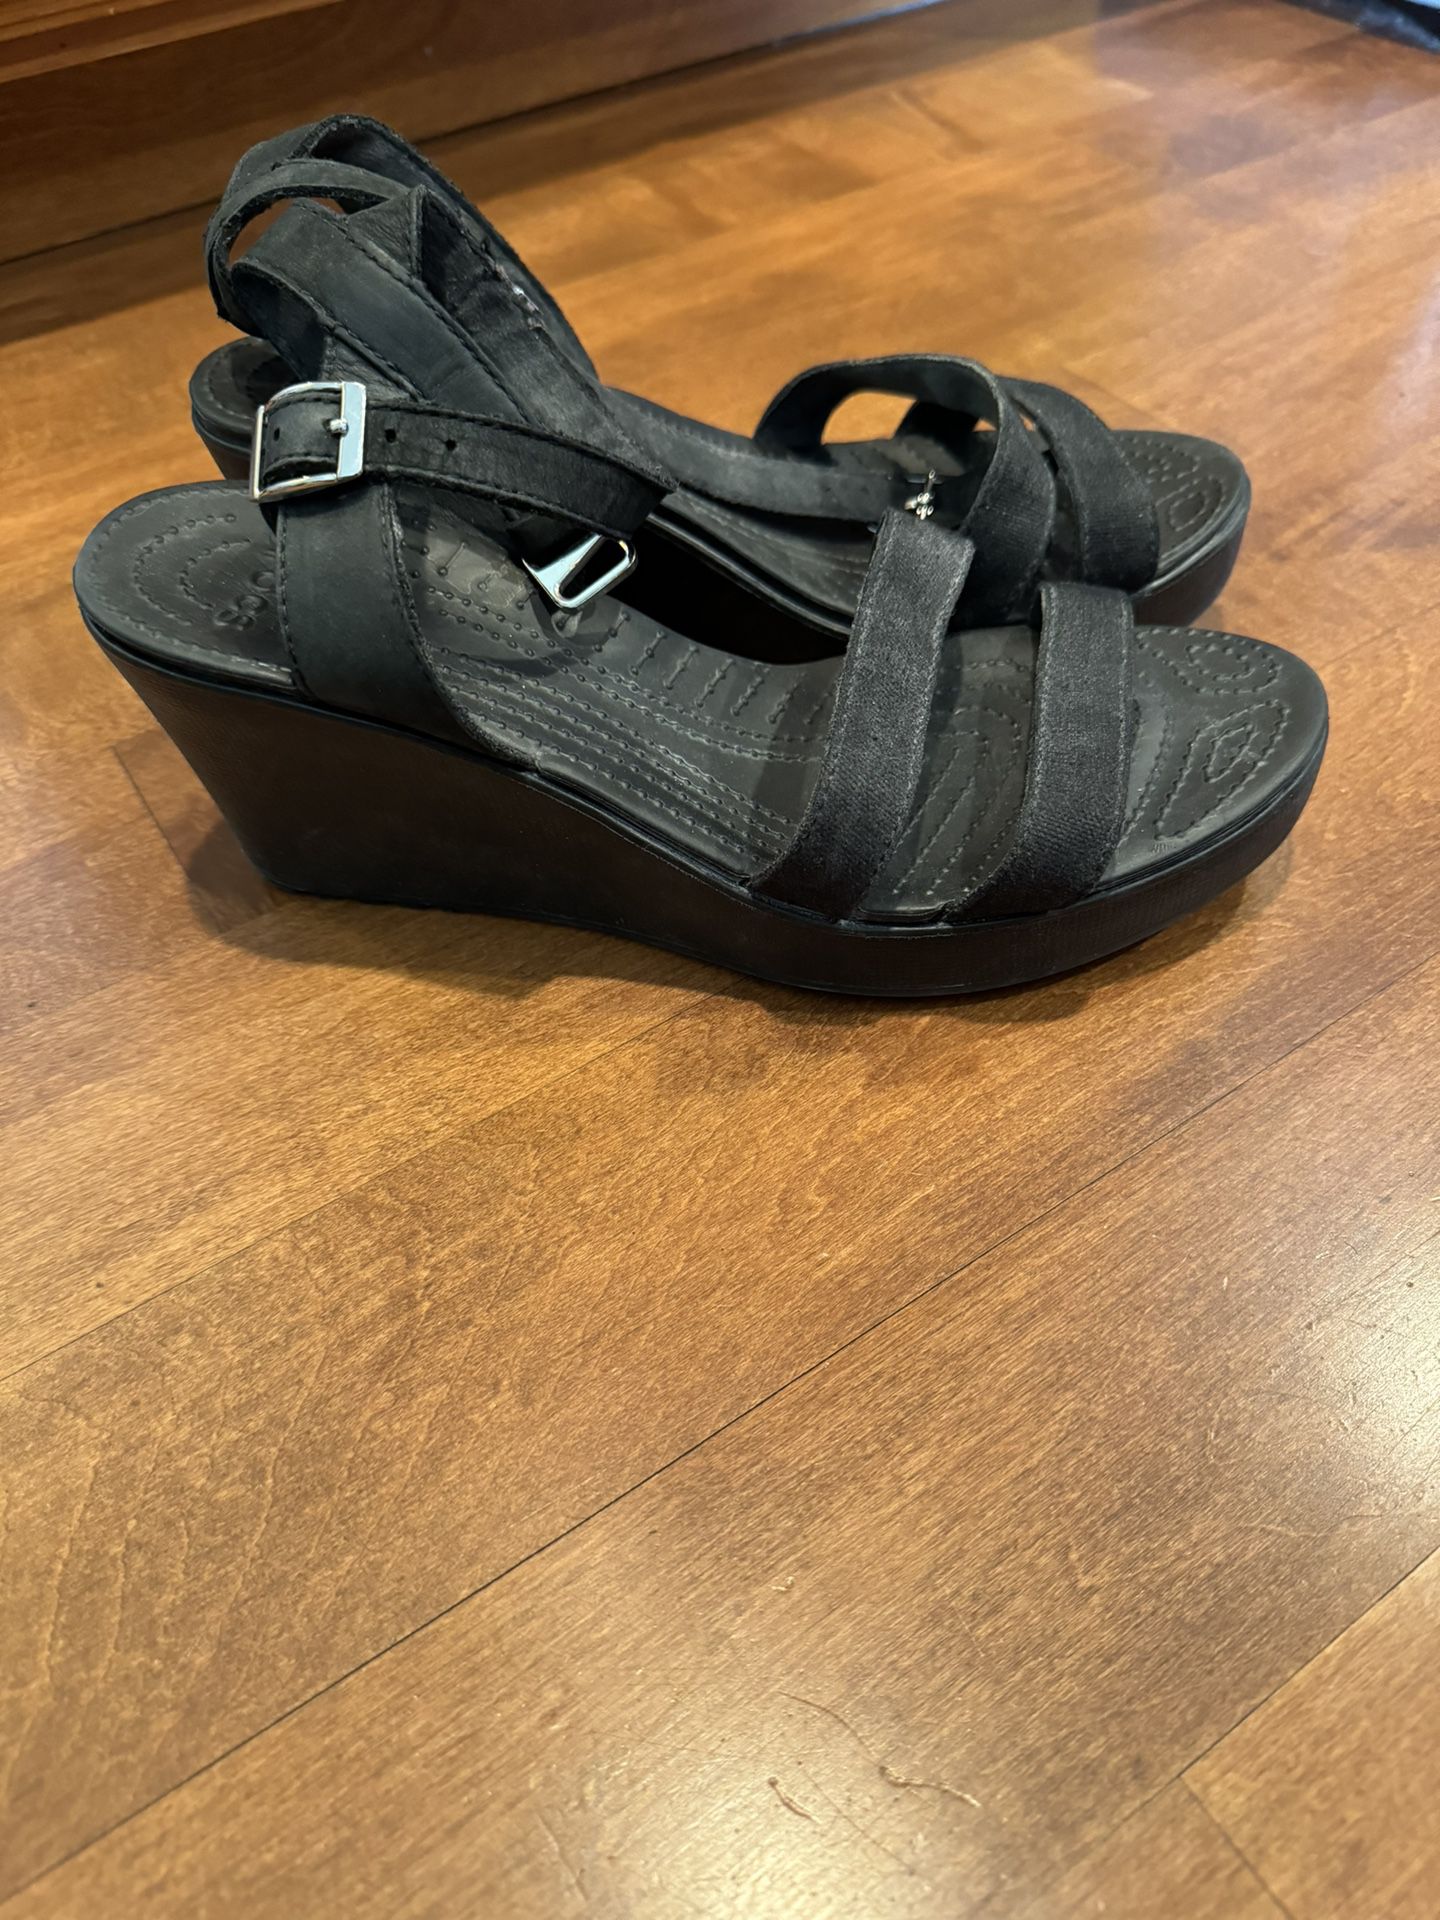 Woman’s Crocs Wedge Sandals Shipping Avaialbe 